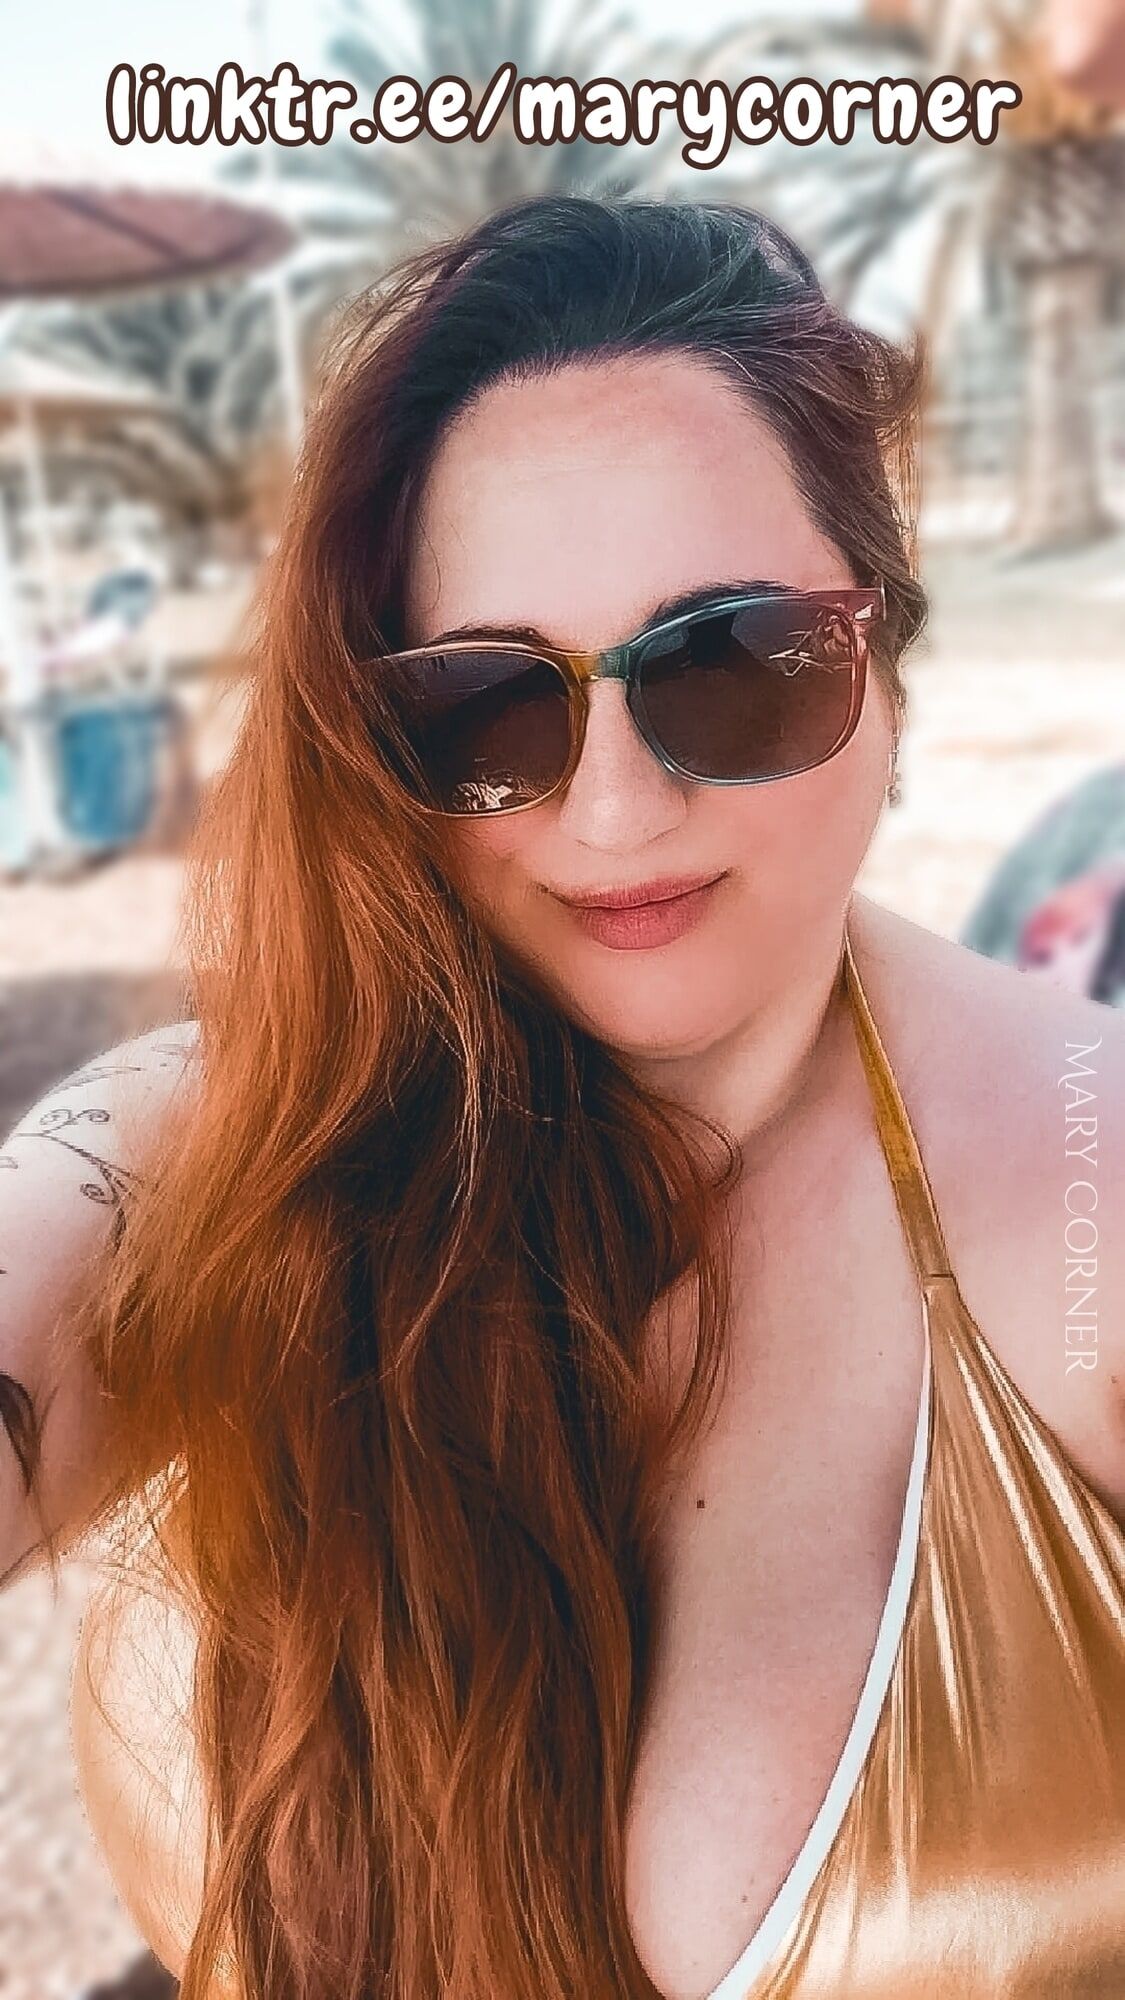 On the beach, cooling down my hot body!🏖️